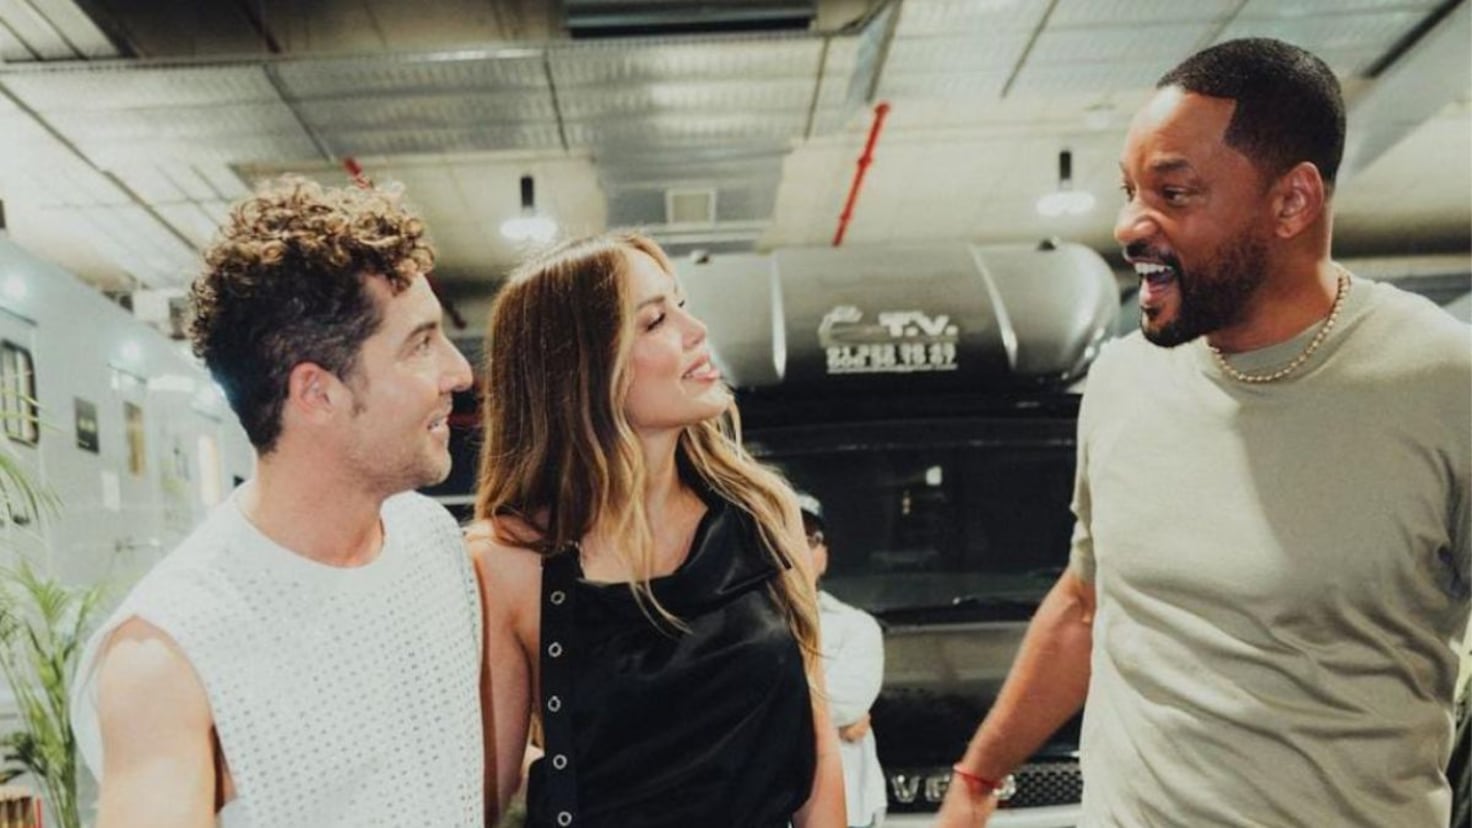 The meeting between Bisbal and Will Smith that everyone is talking about